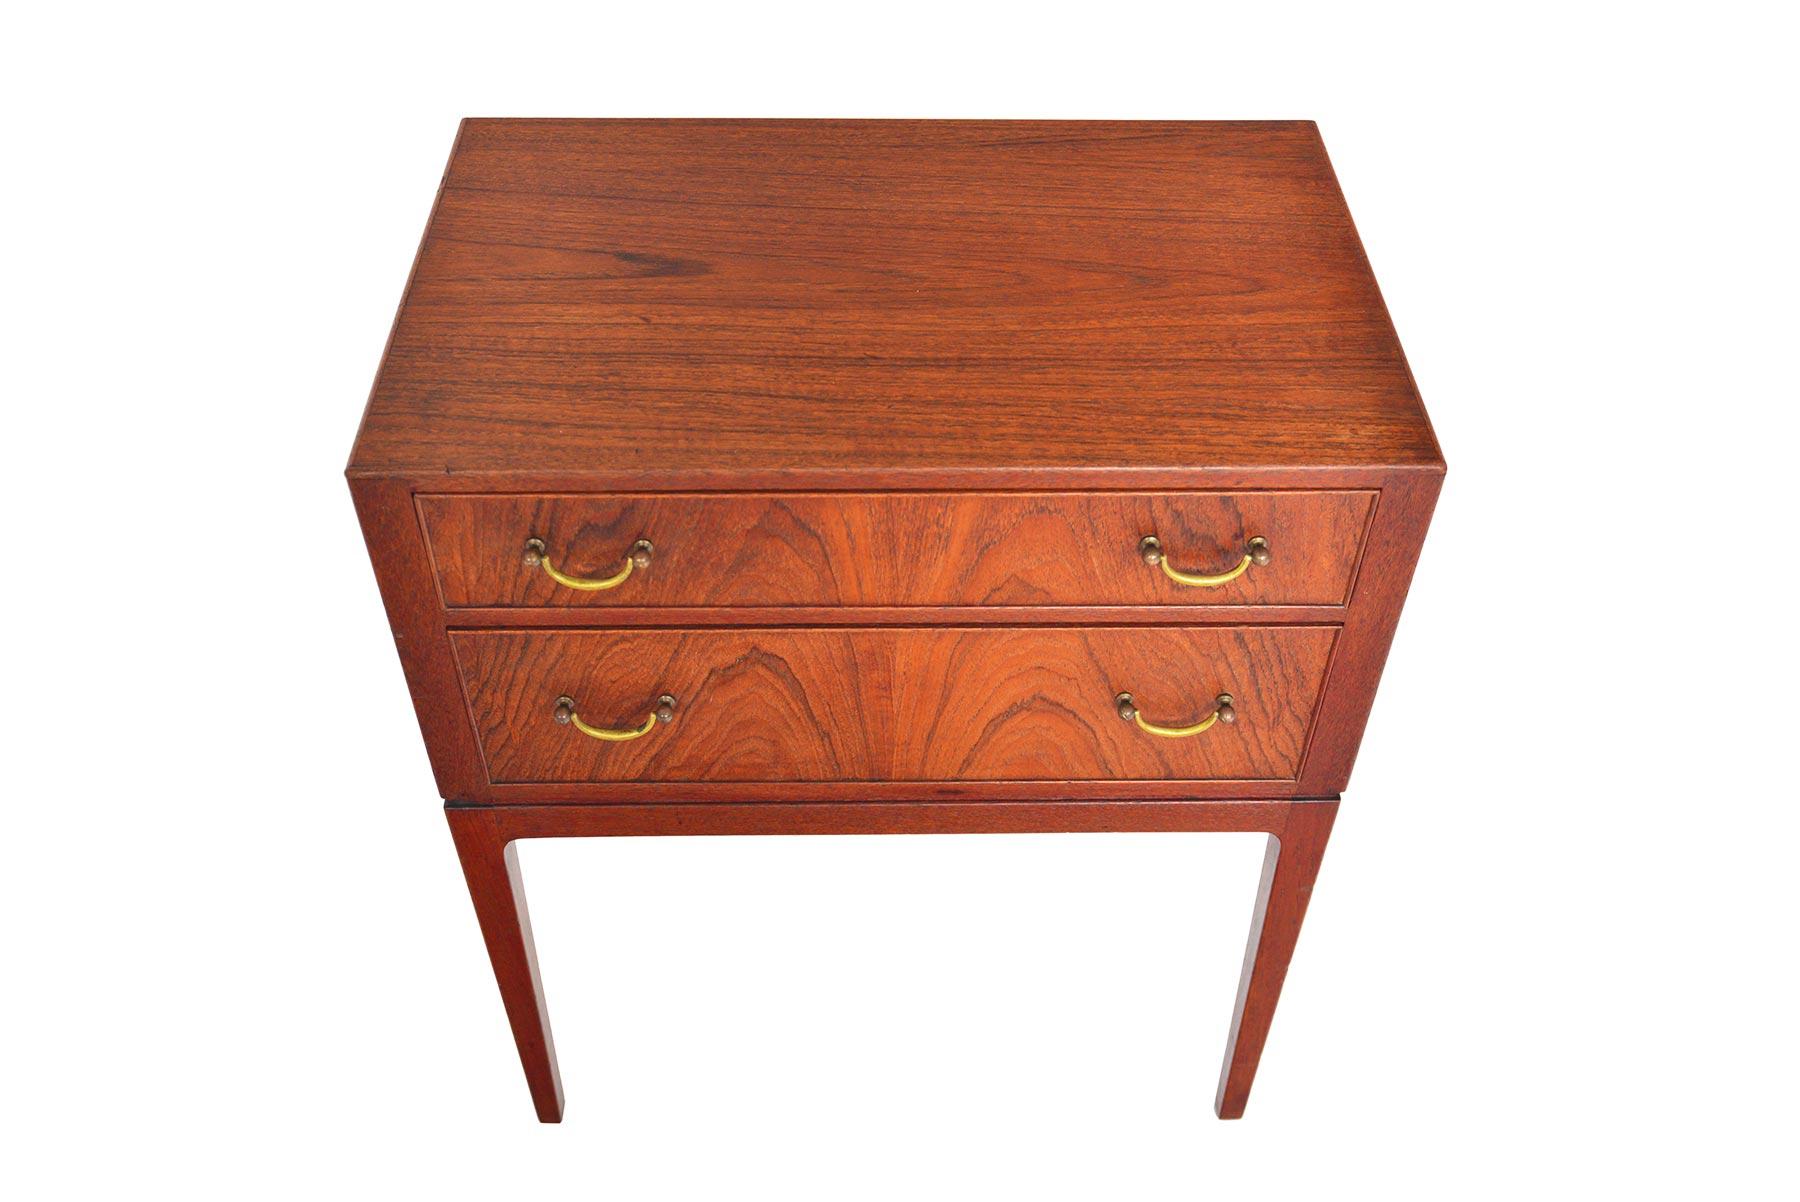 This Danish modern two drawer teak chest is a beautiful blend of modern lines and traditional details. Expertly constructed joinery is highlighted by routed detailing. Each drawer is adorned with original brass pulls. Perfect for use in an entryway